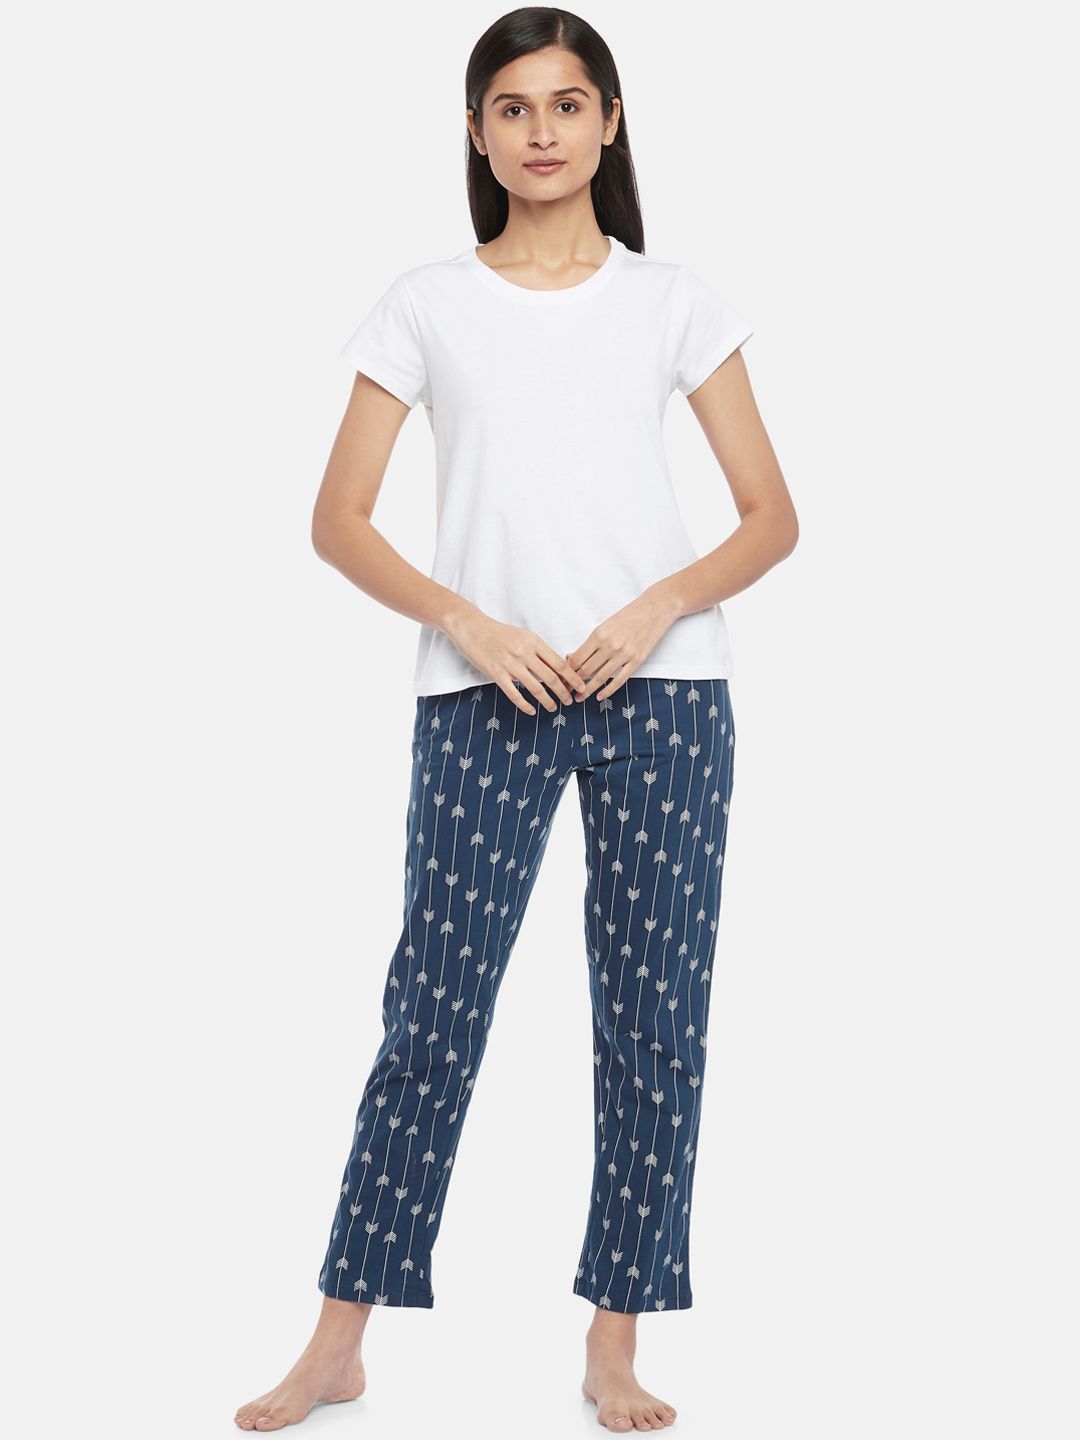 Dreamz by Pantaloons Women Navy Blue & White Printed Night suit Price in India